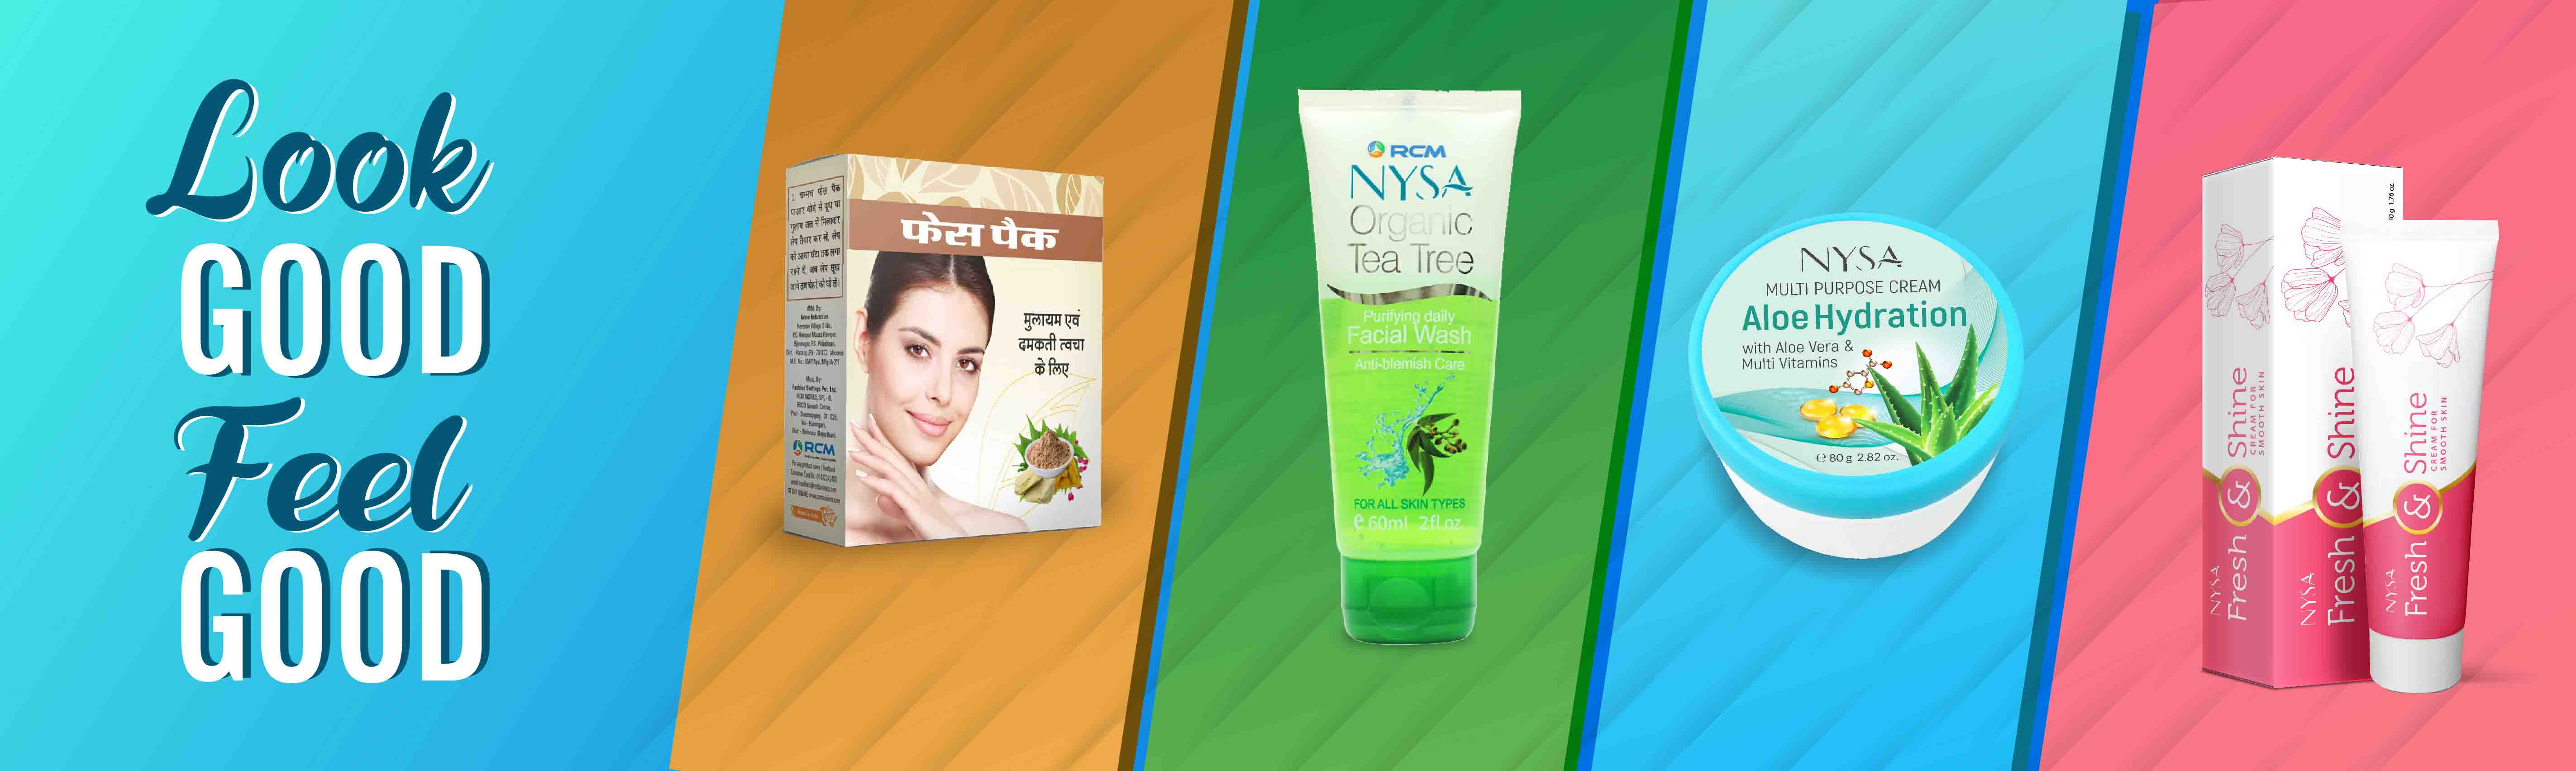 PERSONAL CARE, Face Care, Face Pack